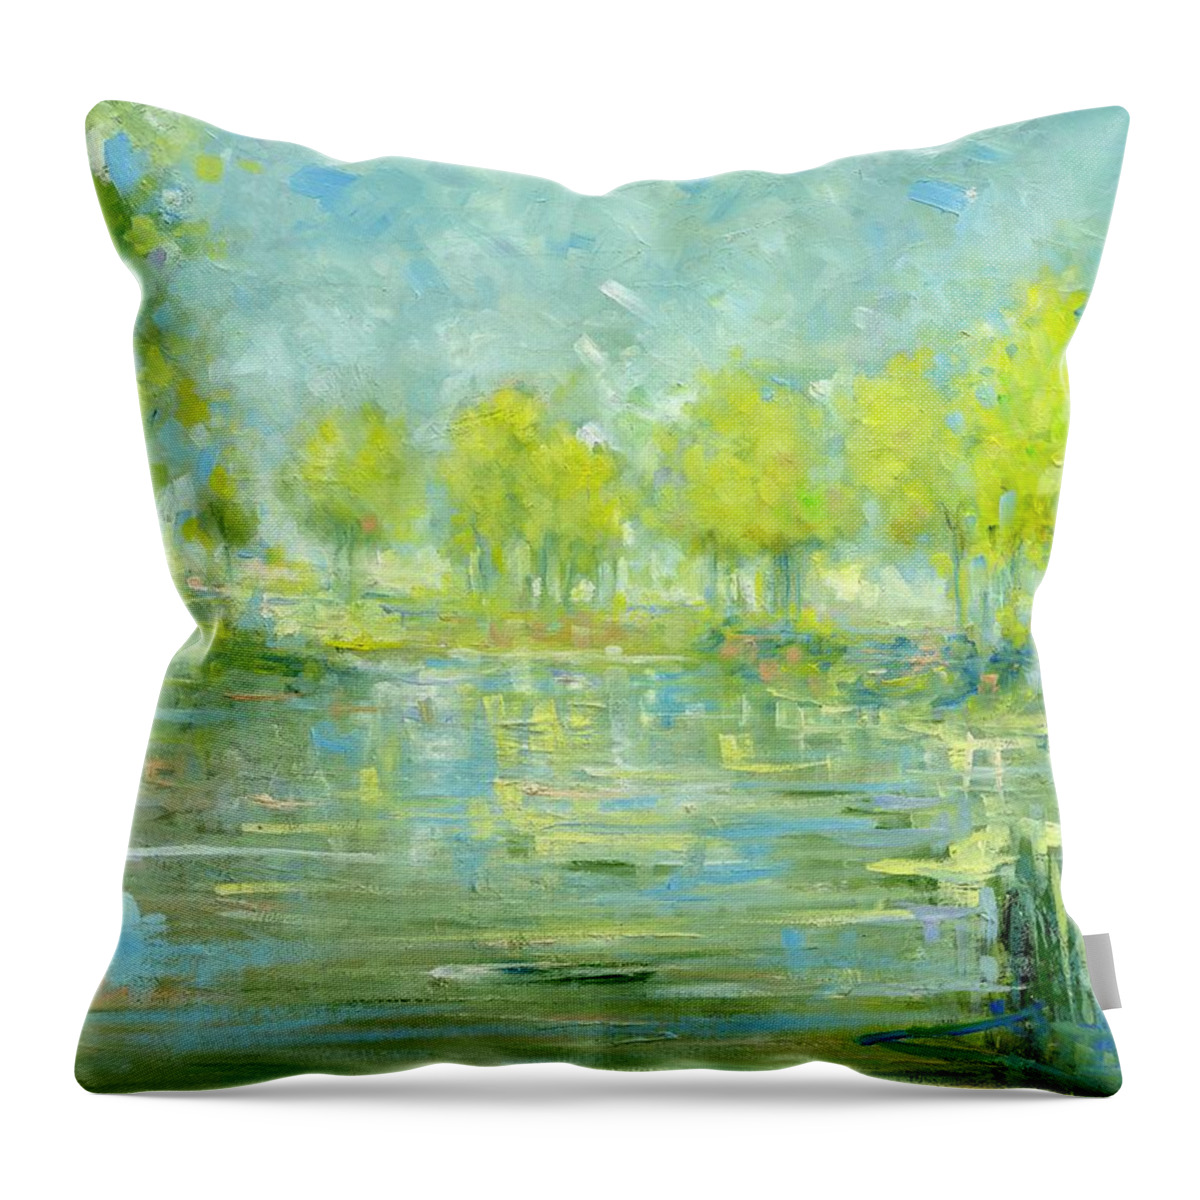 Riverbank Throw Pillow featuring the painting Riverbank by Roger Clarke